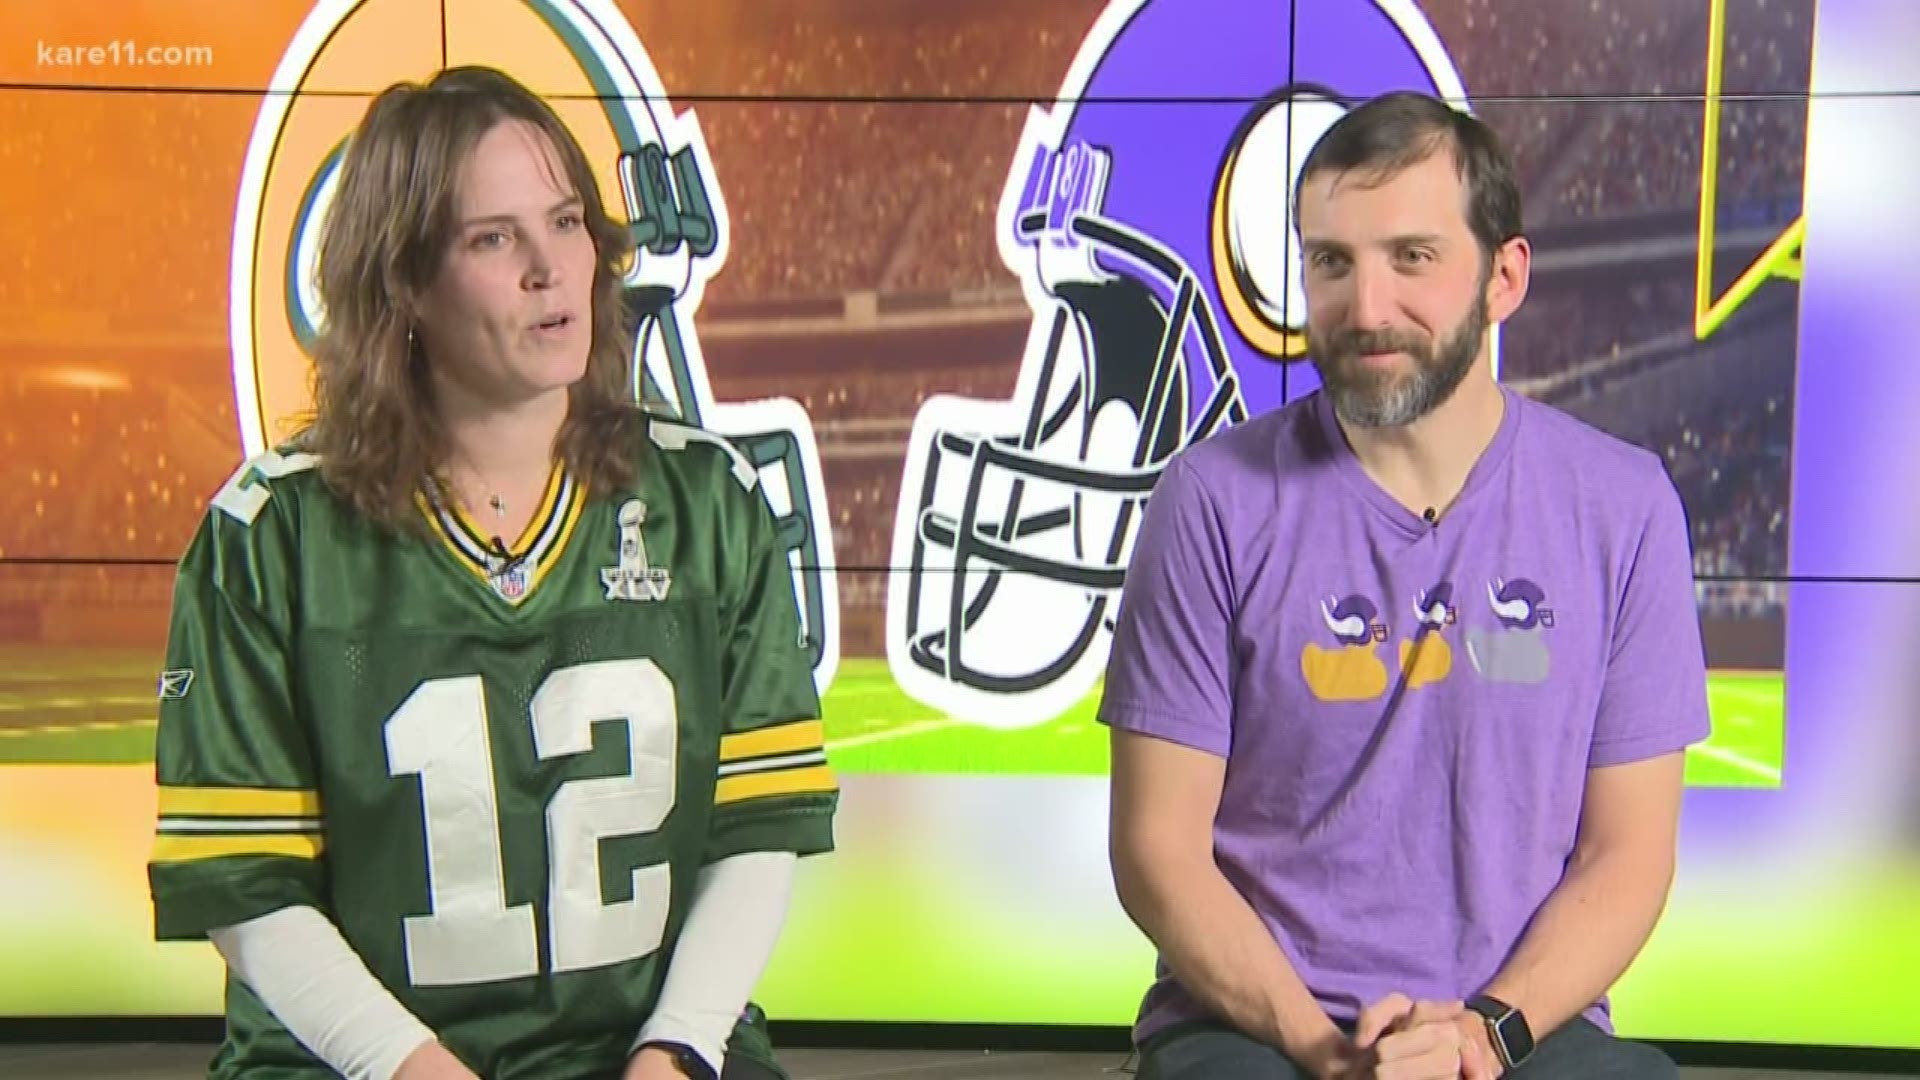 There's nothing fiercer than the Packers vs Vikings border battle, especially when family is involved.